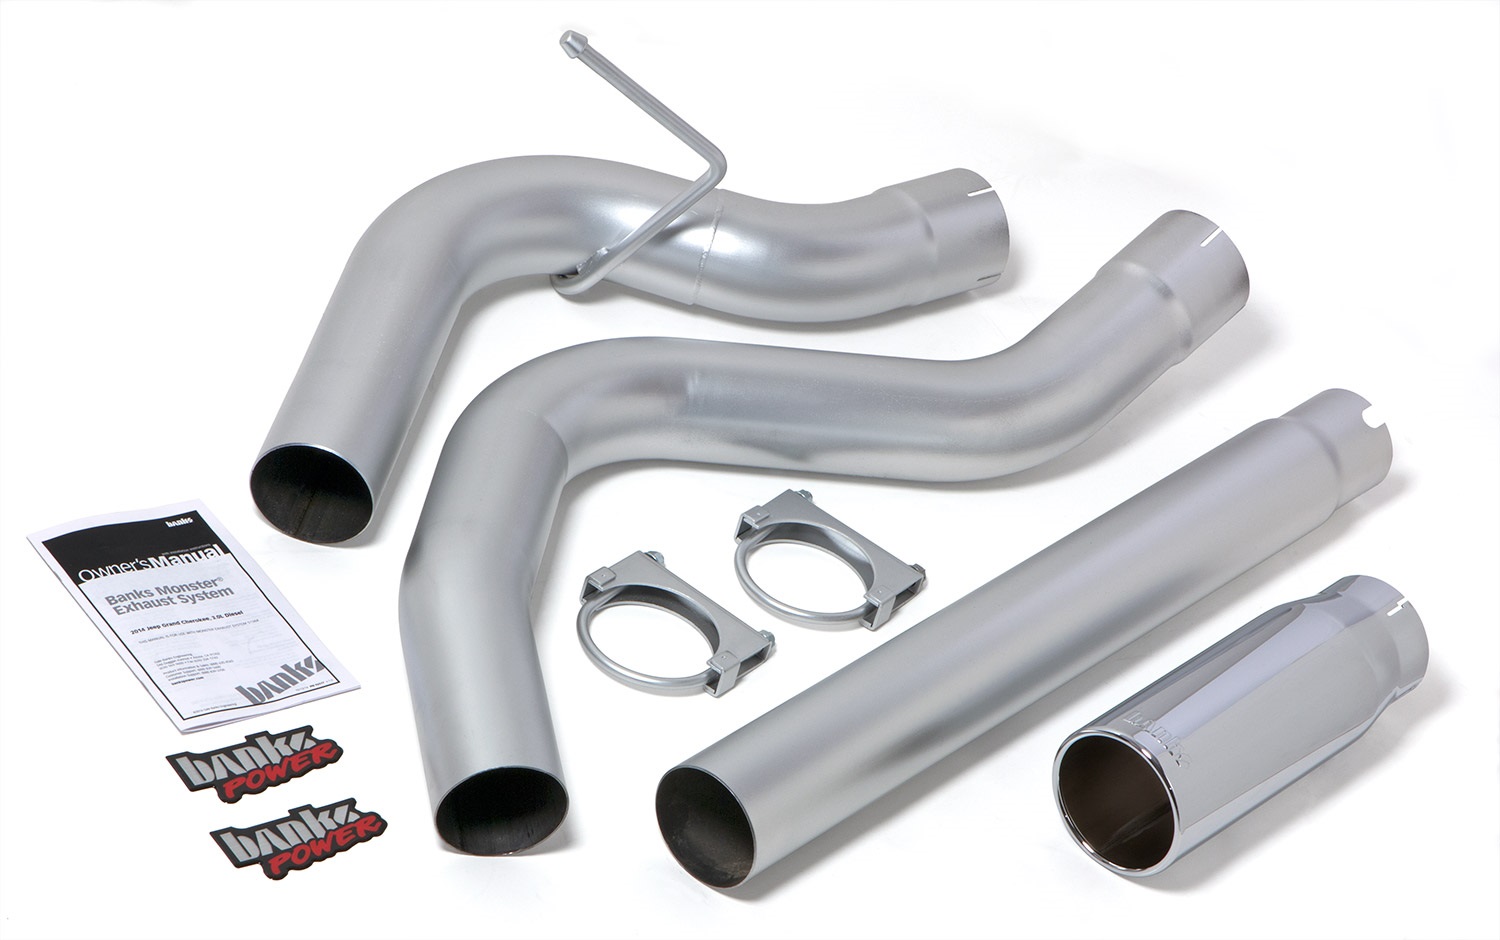 Banks Power 48601 Single Monster Exhaust System for 14-15 Dodge